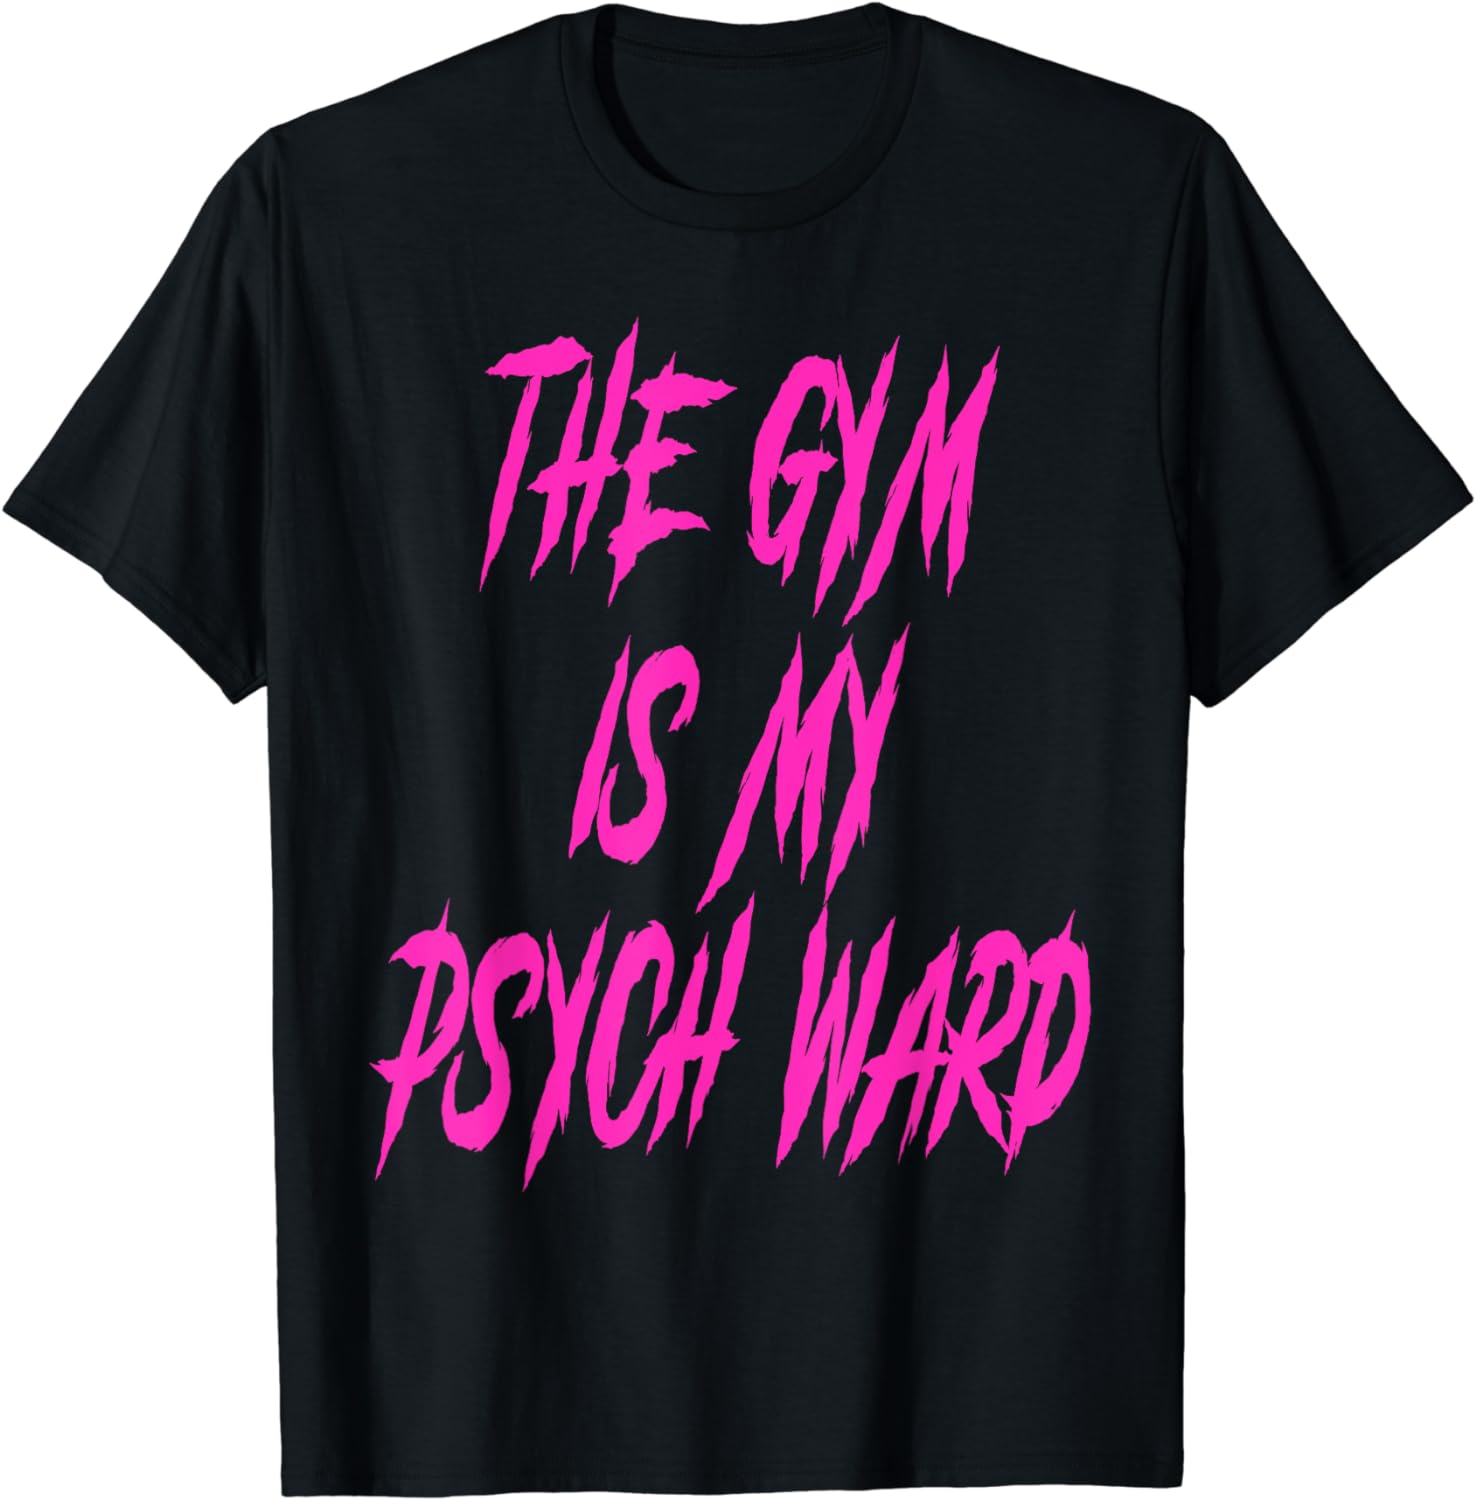 They Gym Is My Ward Funny Cute Psych Joke Fitness Workout T Shirt Buy T Shirt Designs